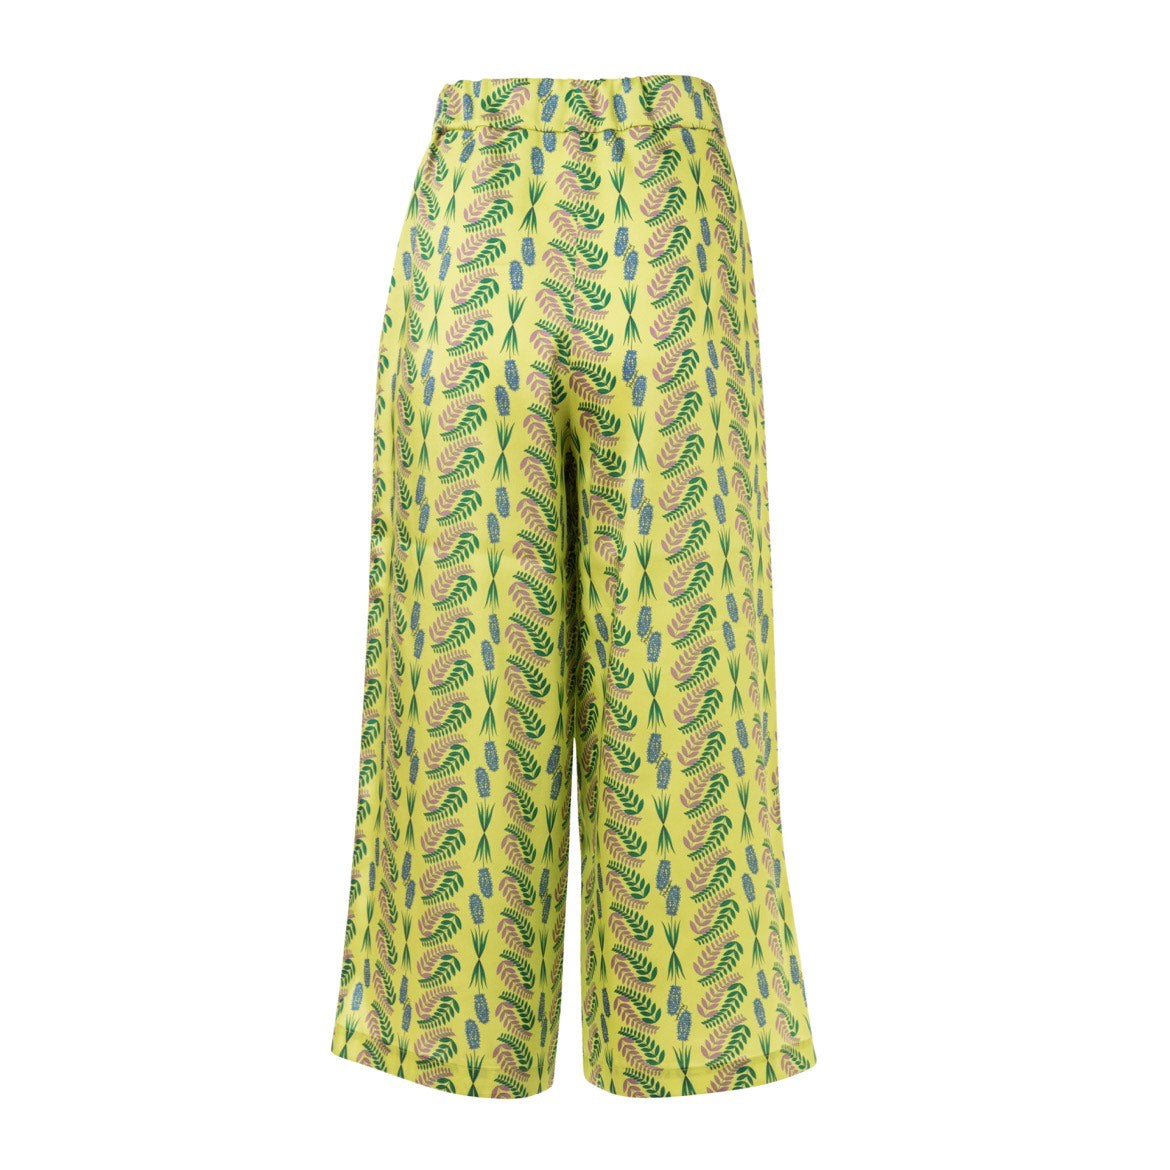 Olive Trousers v.1.0 - Loose Fit Printed Silky Trousers